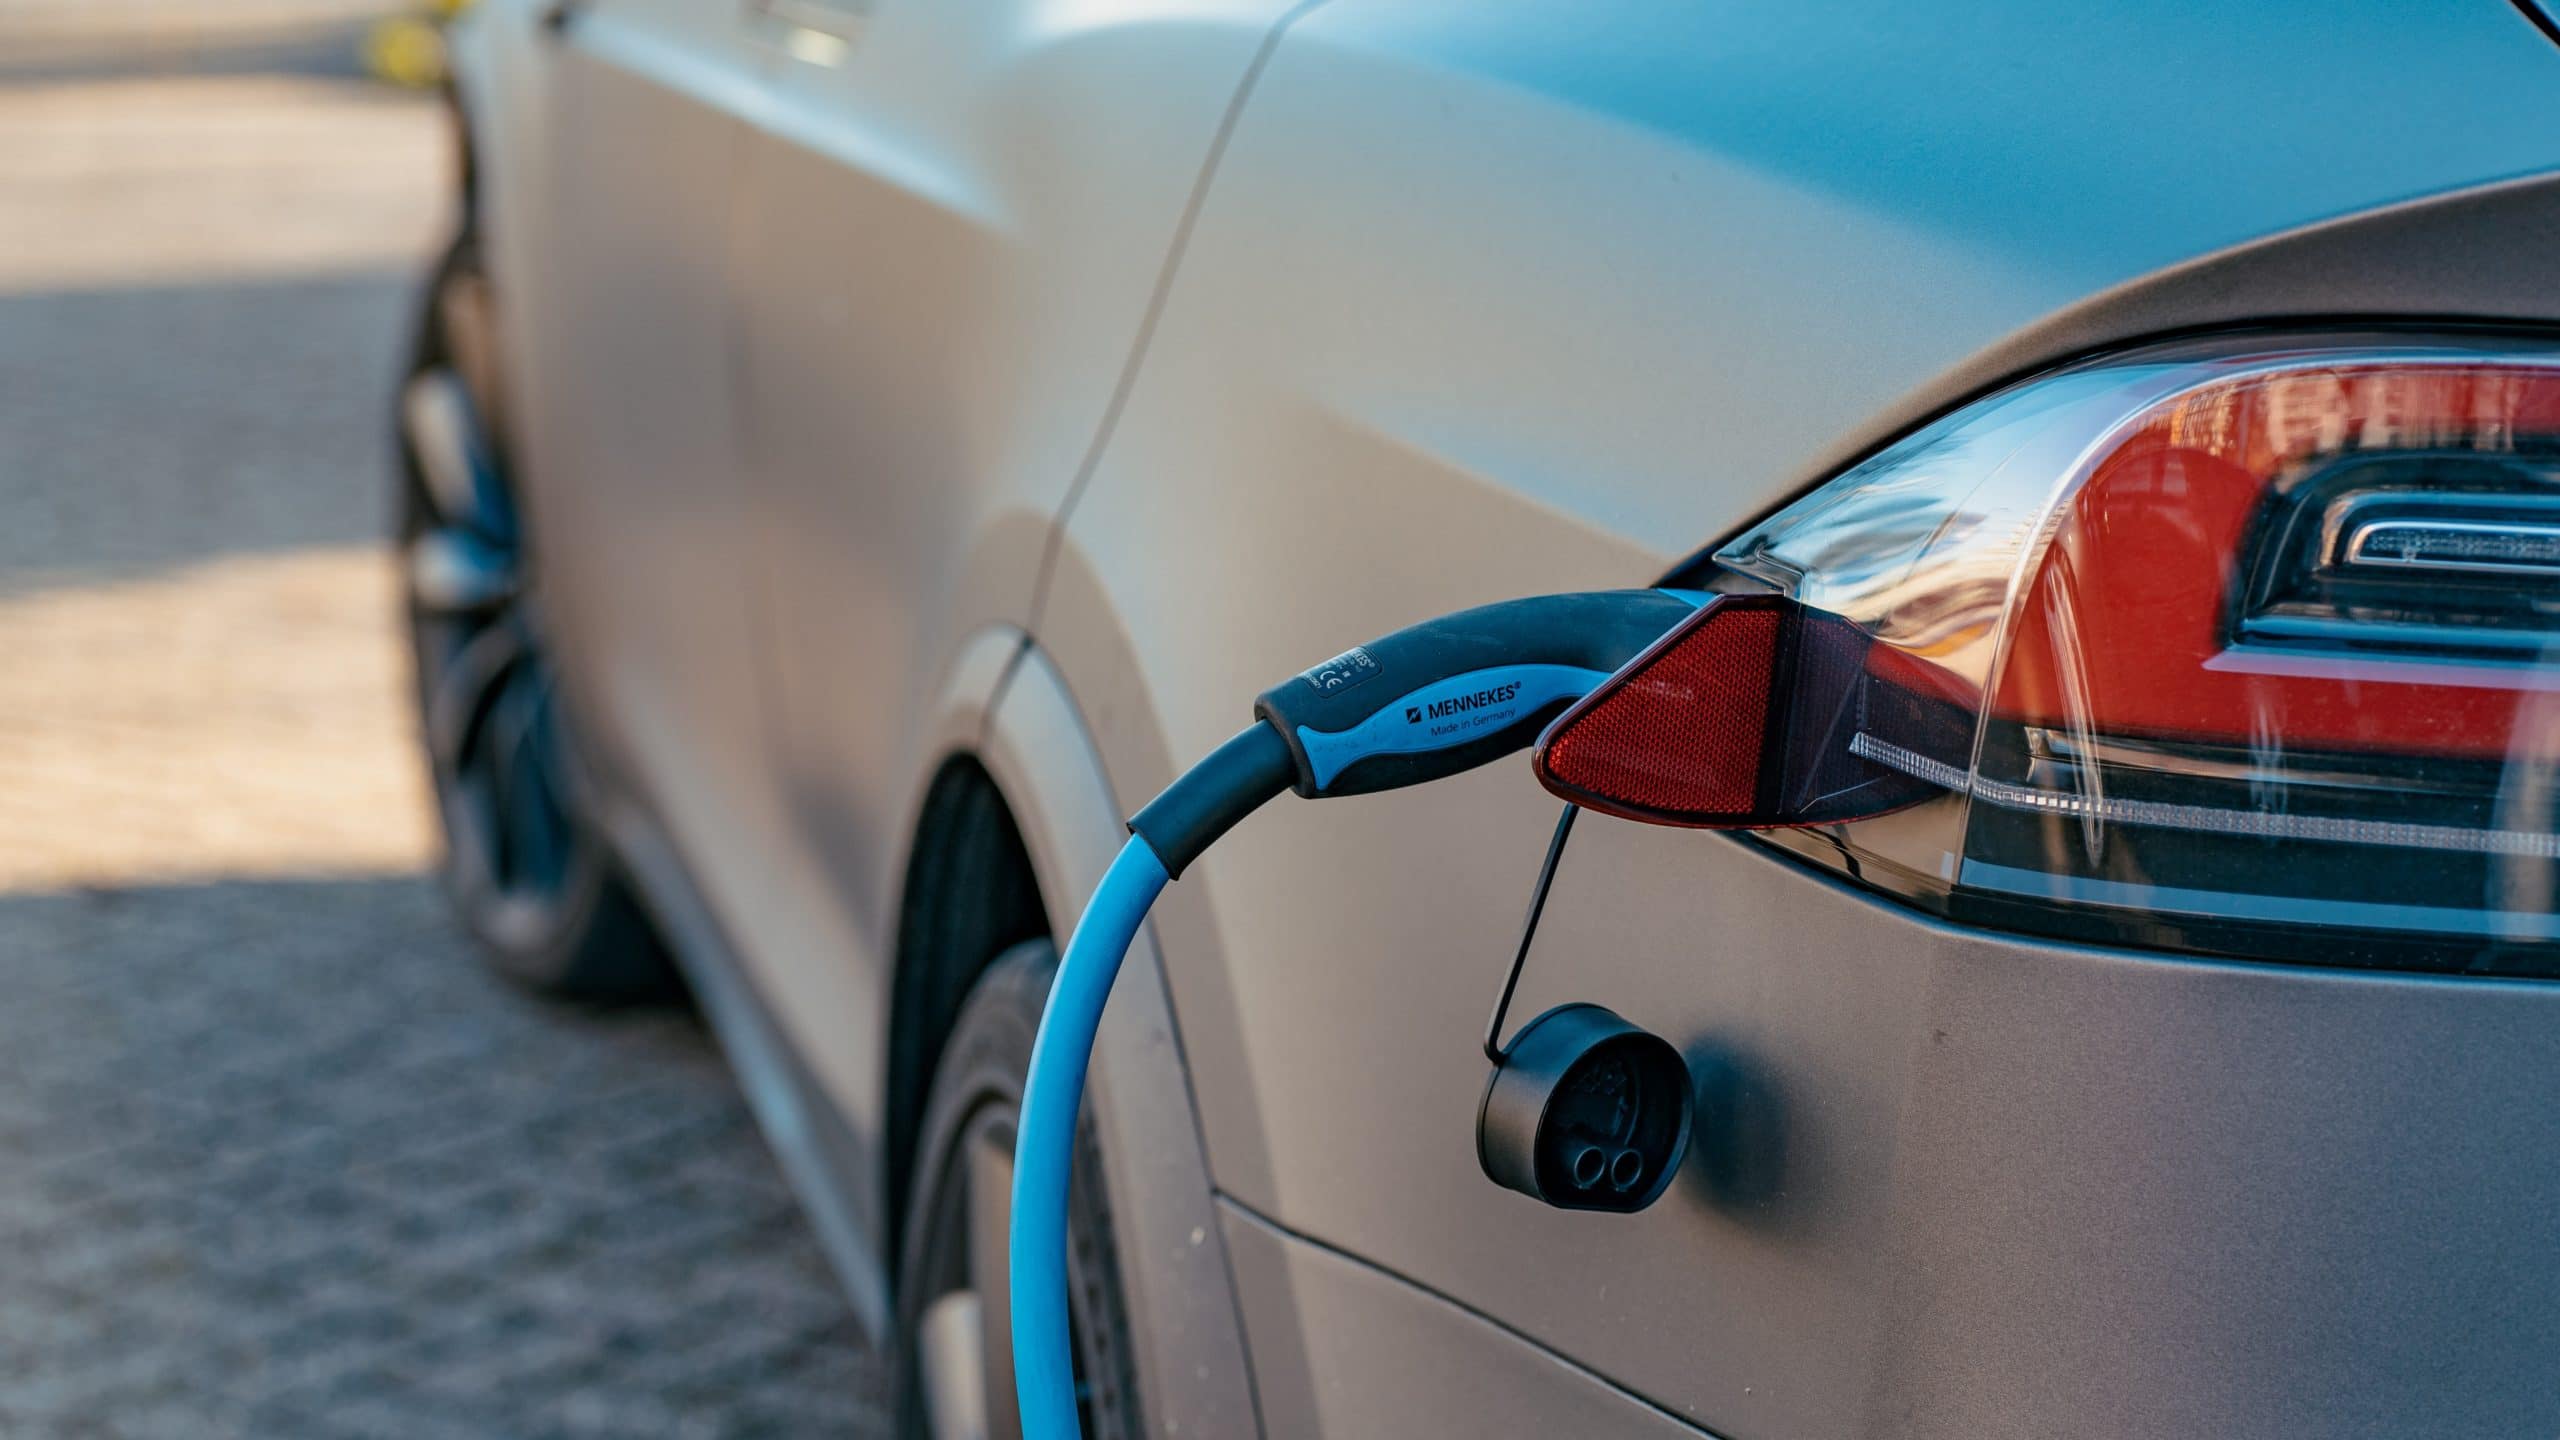 Electric vehicles and air pollution: the claims and the facts - EPHA